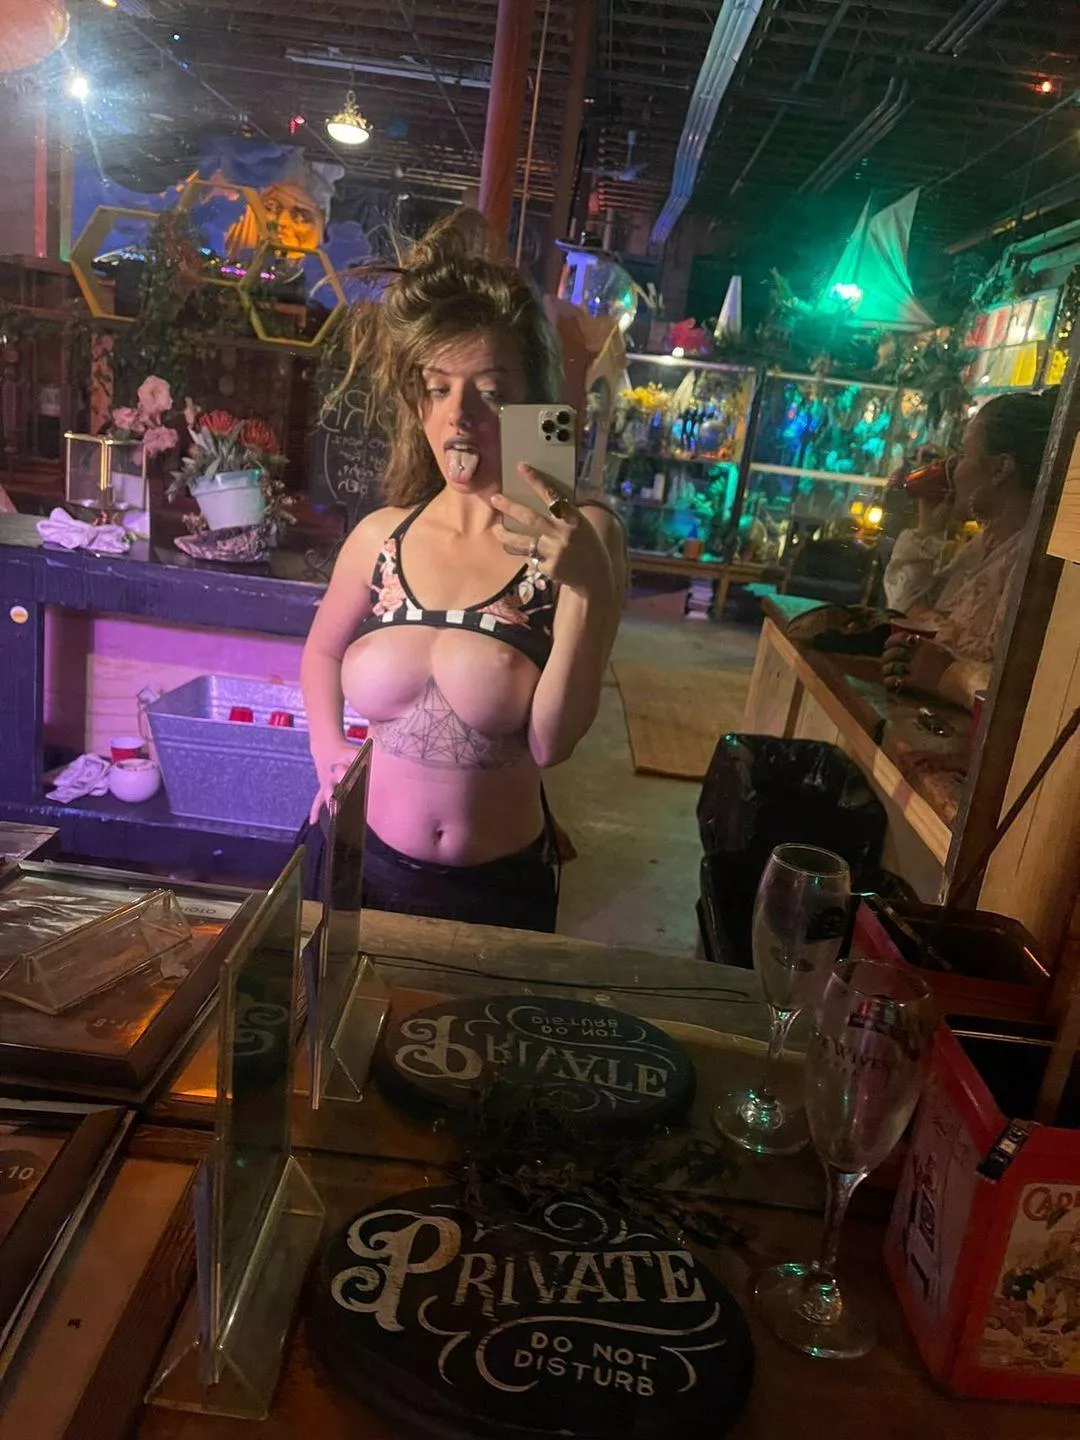 Local bar wench flashing when no ones watching nudes in fortyfivefiftyfive Onlynudes